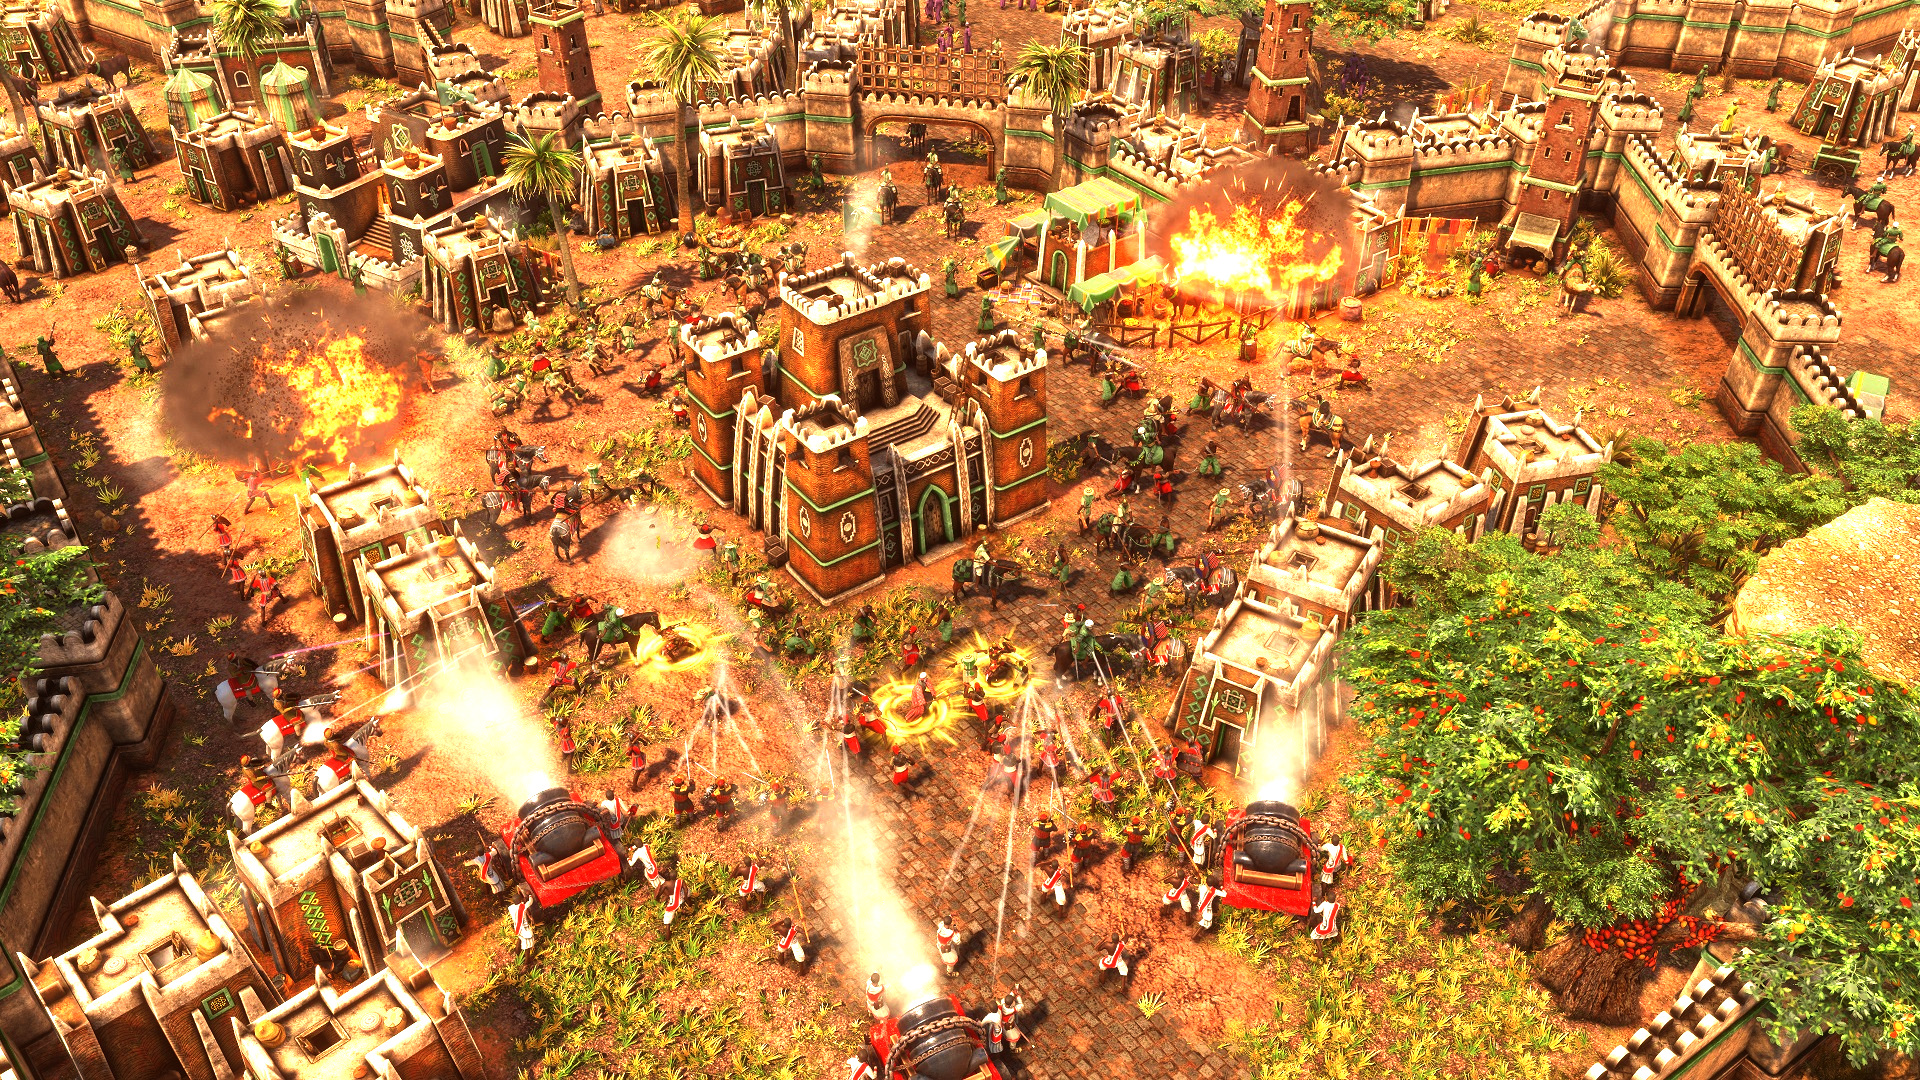 Age of Empires 3’s Africa-themed expansion drops next month